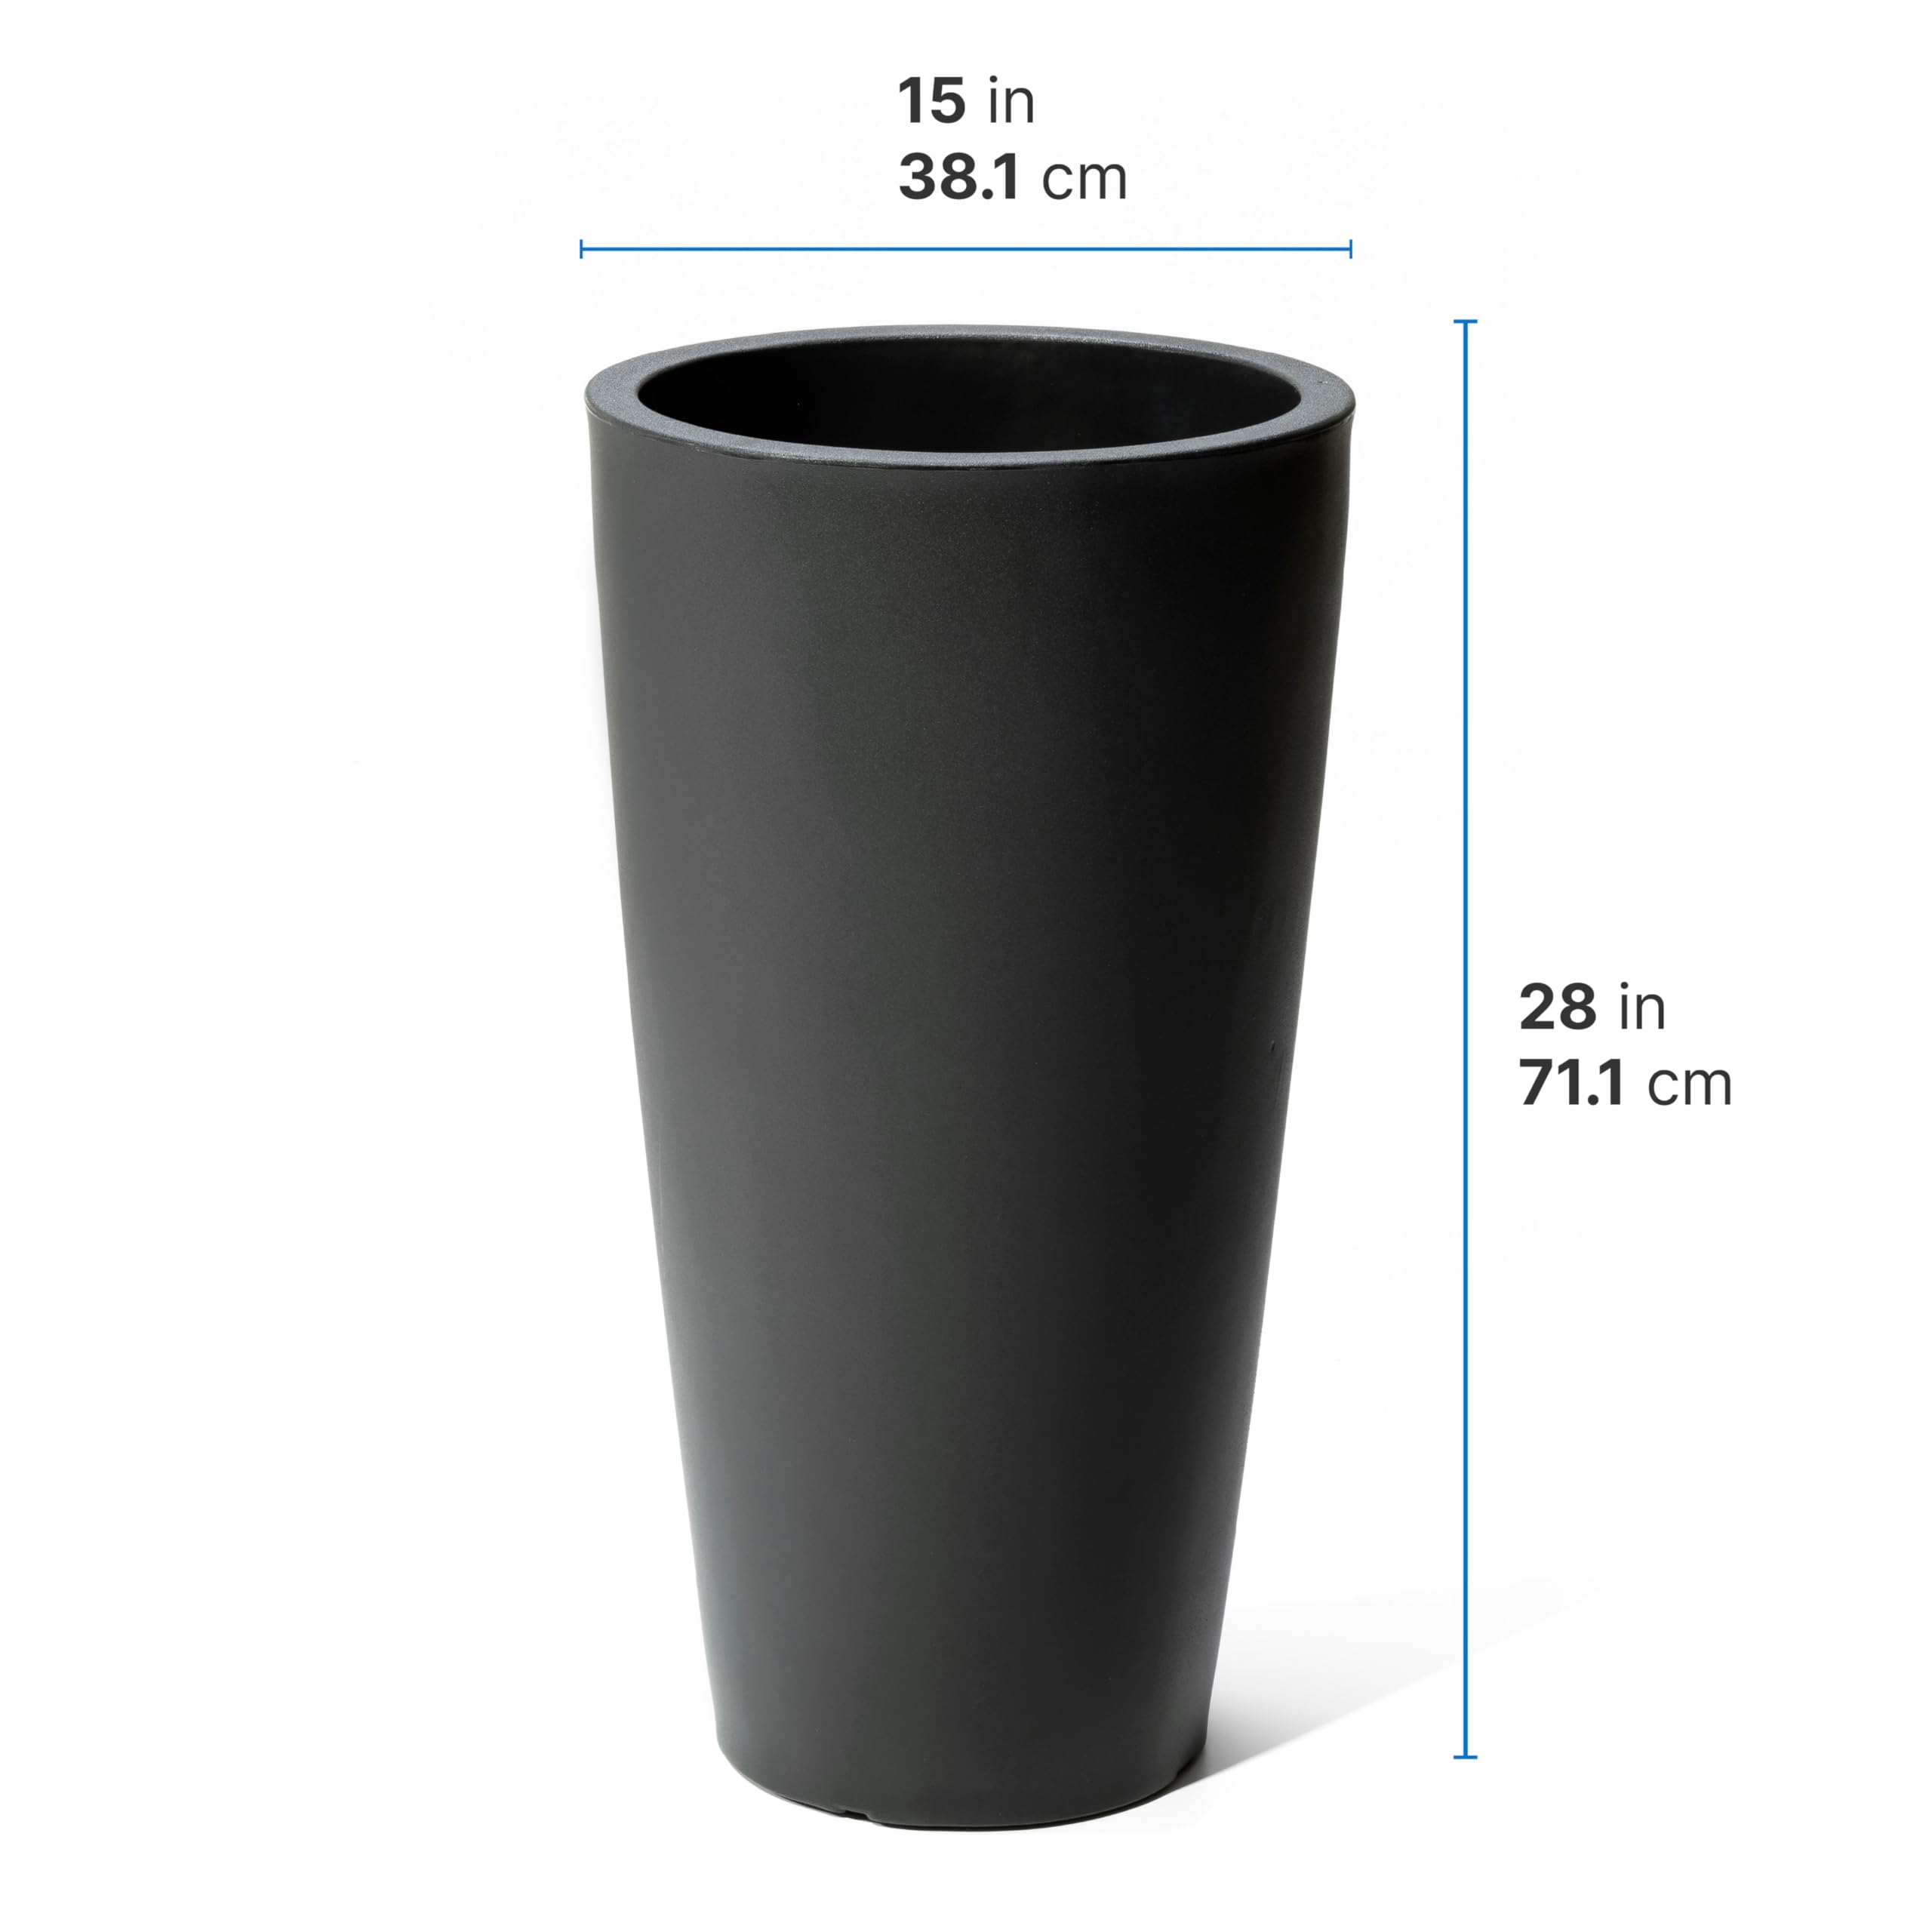 2-Count Step2 Tremont Tall Round Planter Pot (Black) $62 + Free Shipping $63